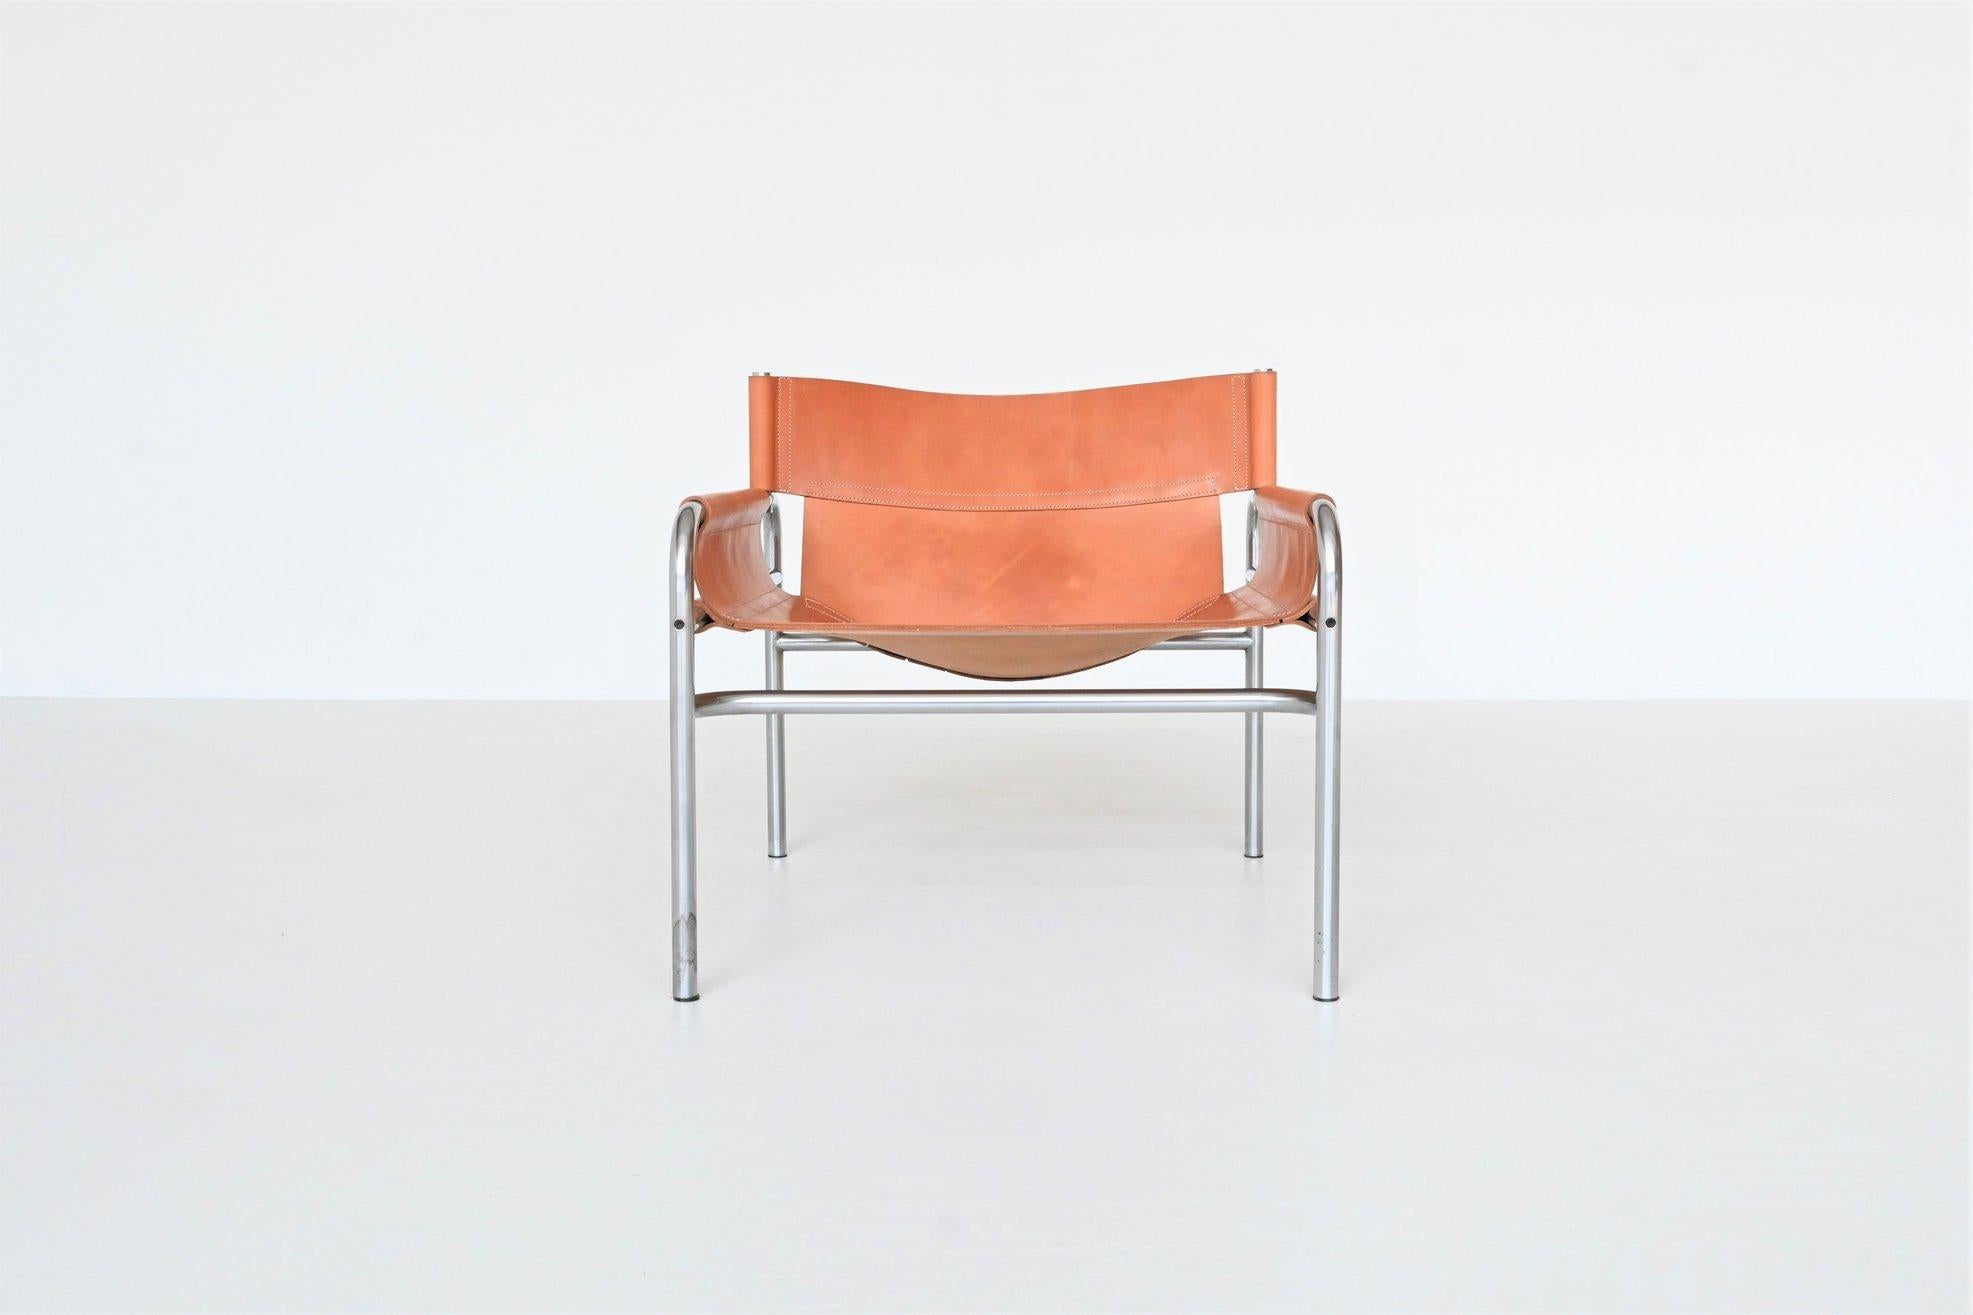 Fantastic lounge chair model SZ14 designed by Walter Antonis and manufactured by ‘t Spectrum Bergeijk, The Netherlands 1971 (collection 1971-1974). This nice shaped low lounge chair has a chromed steel tubular frame and has been reupholstered in